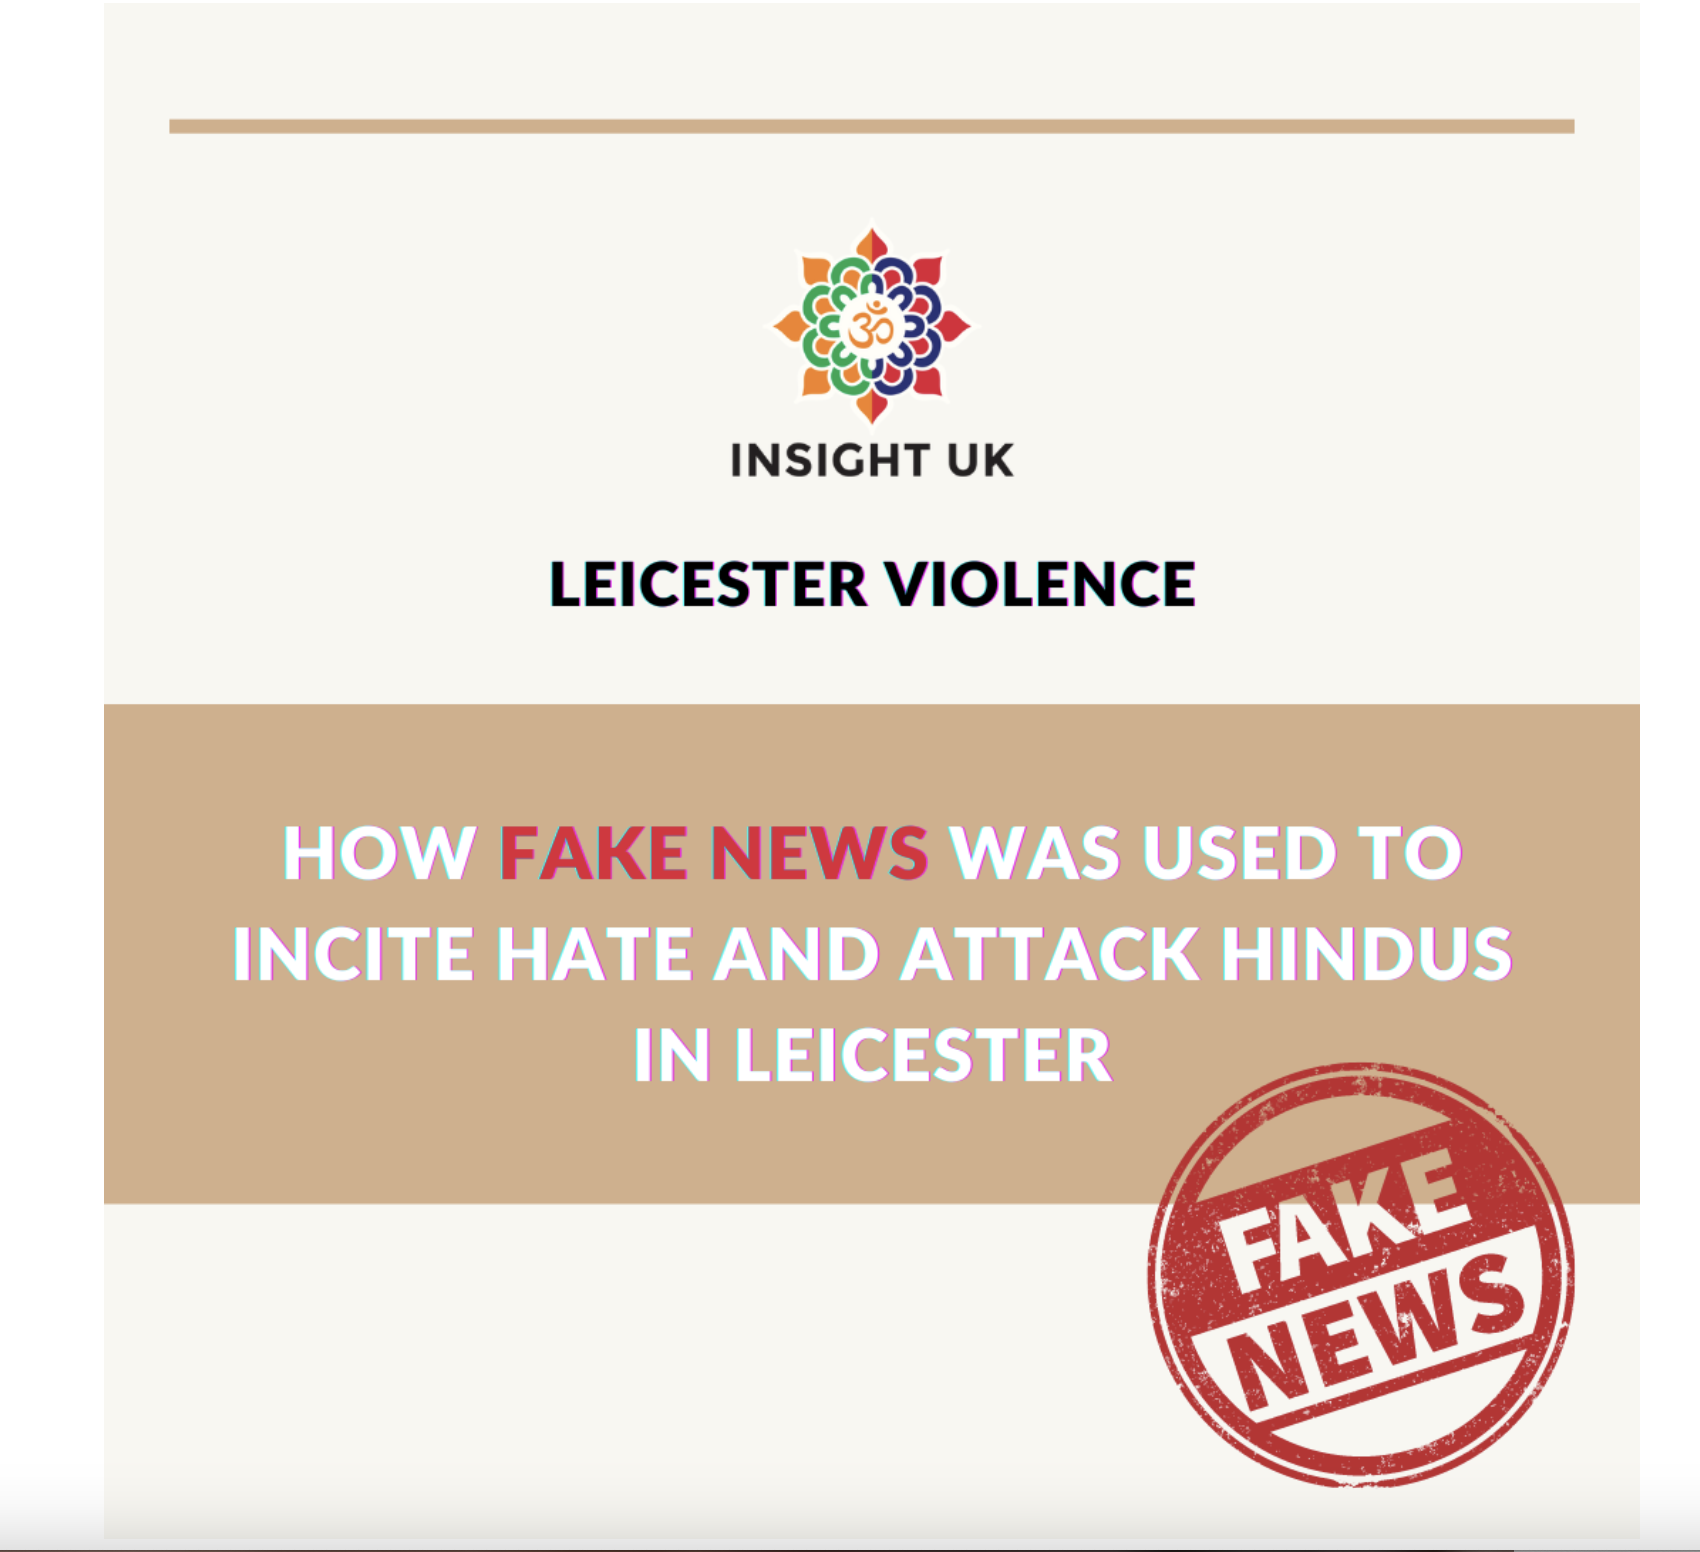 How Fake News Was Used To Incite Hate And Attack Hindus In Leicester